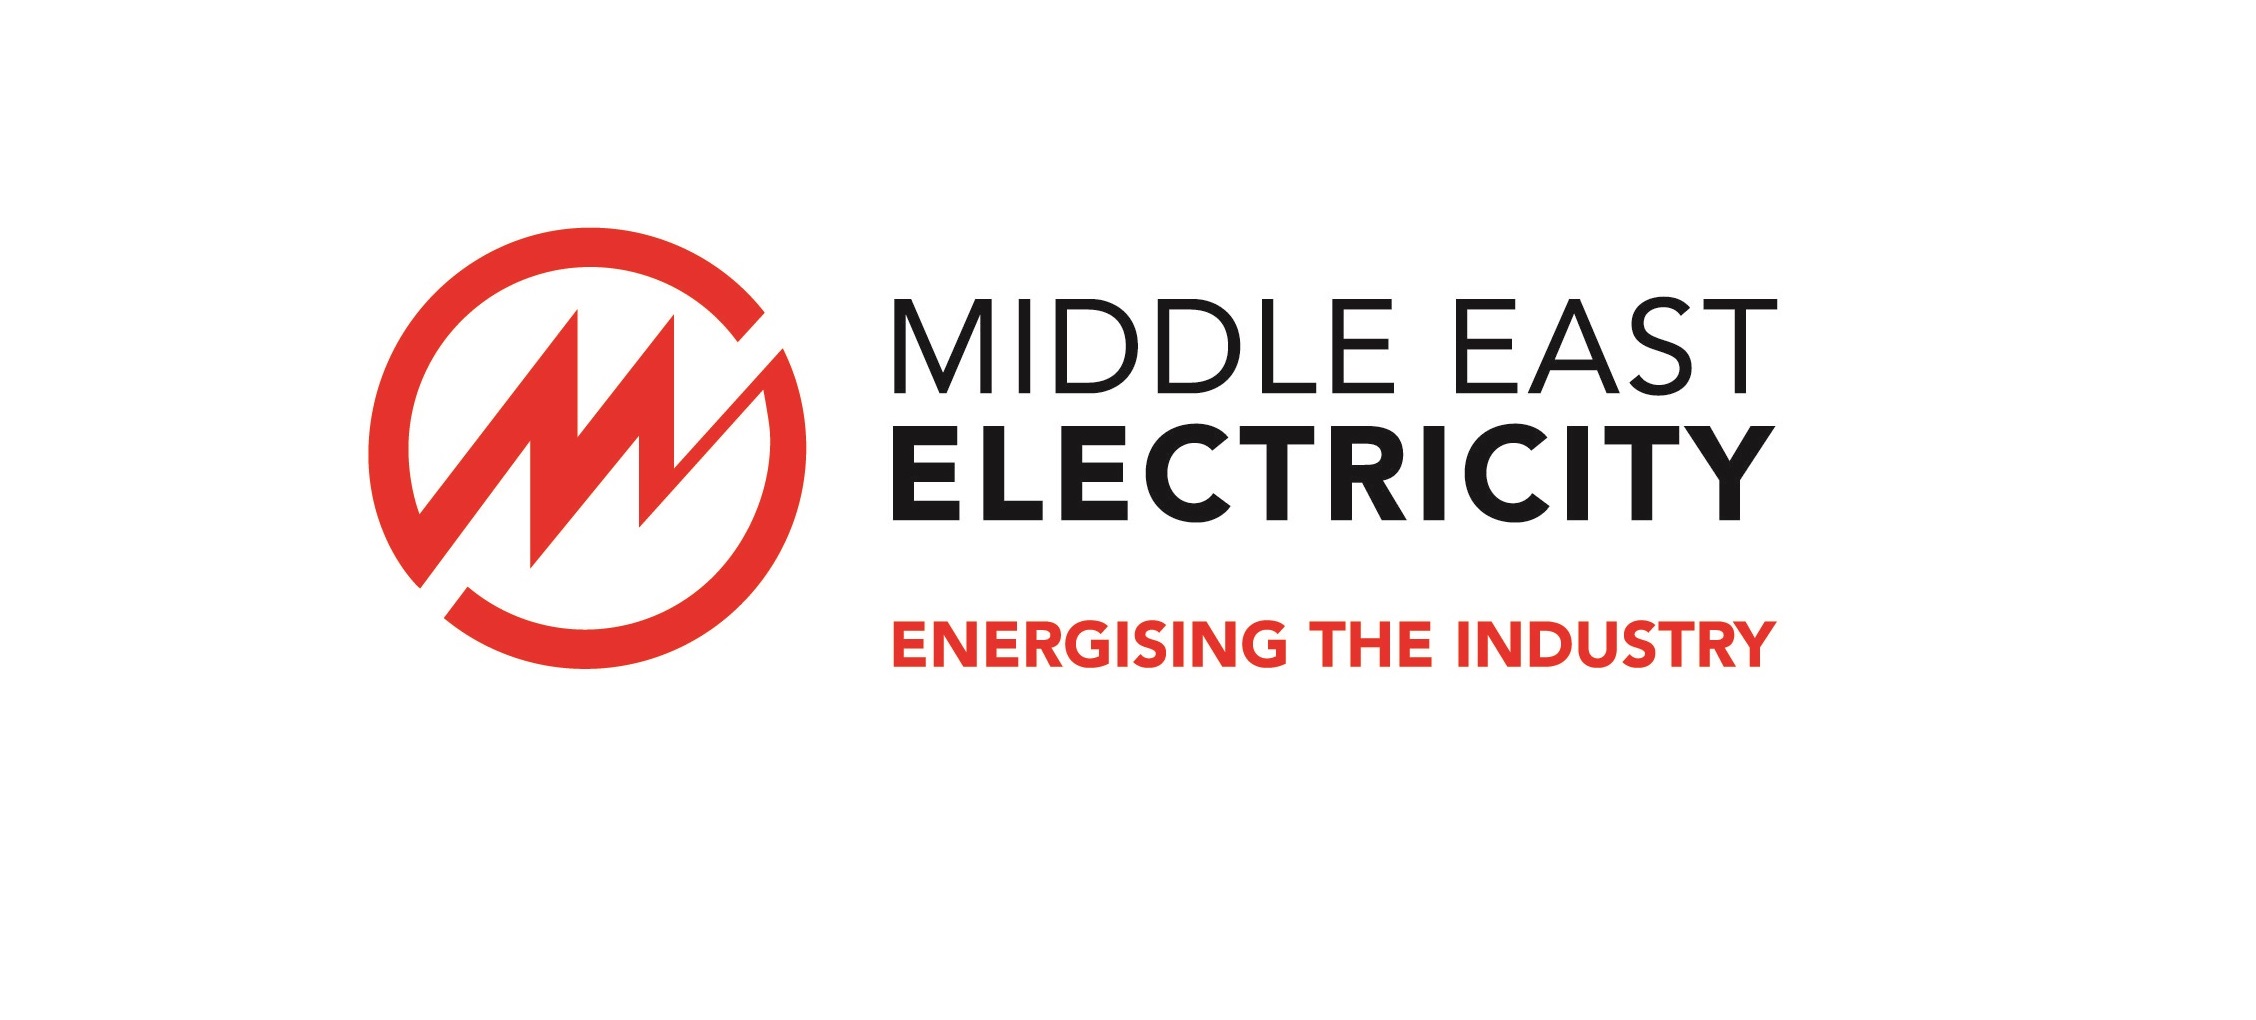 Zeppelin Power Systems Premium Pre-owned department at Middle East Electricity